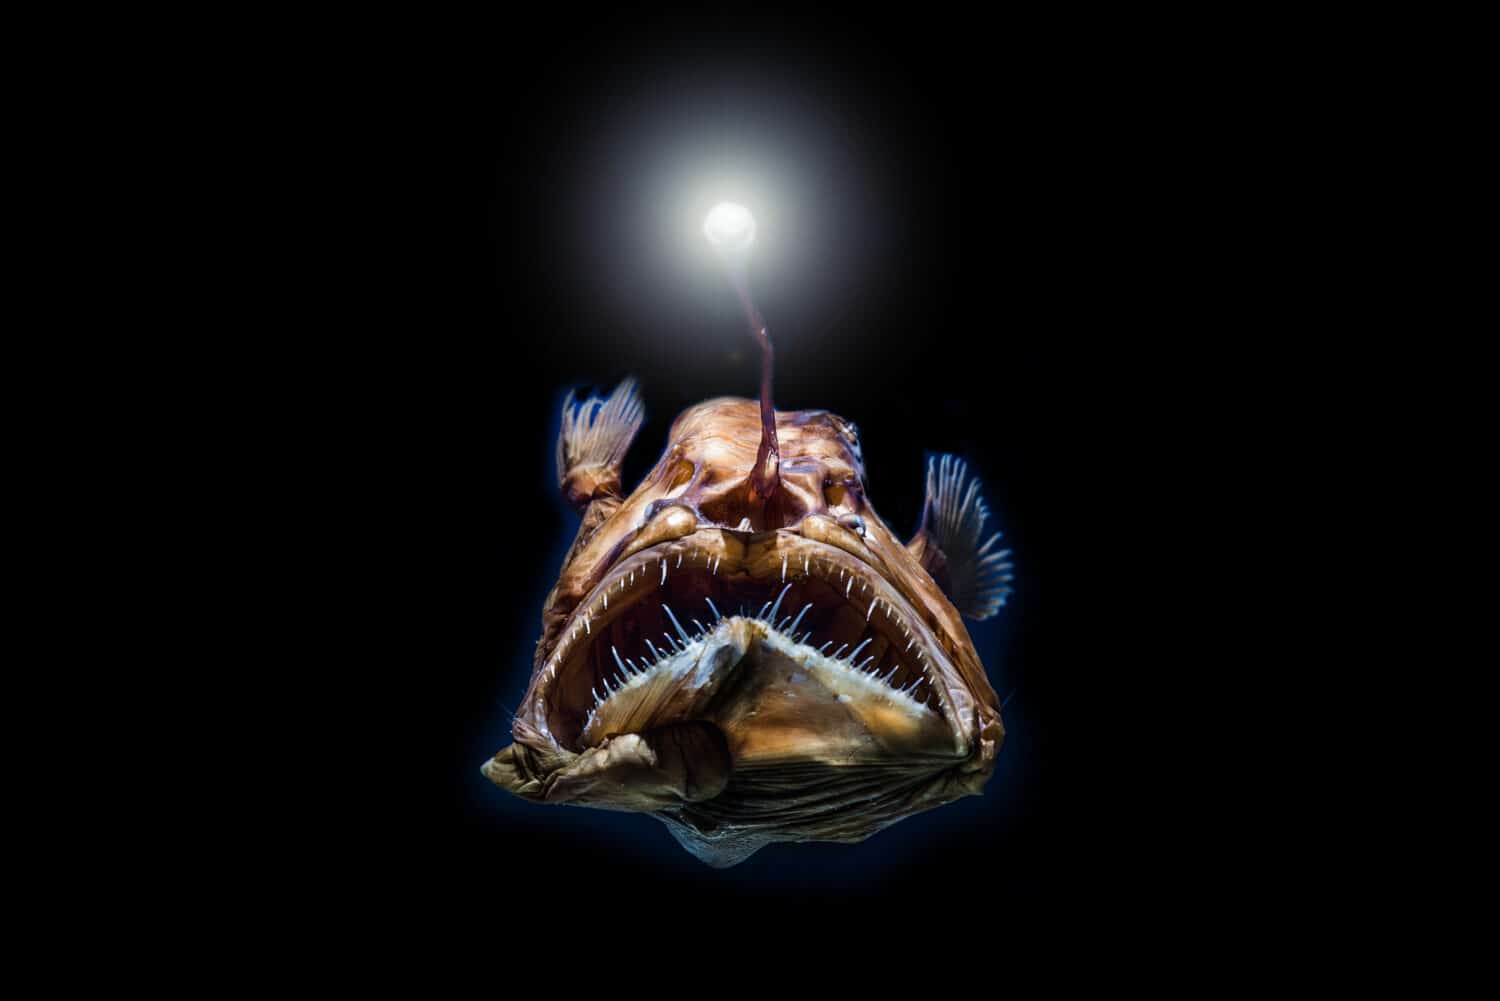 abyssal zone angler fish